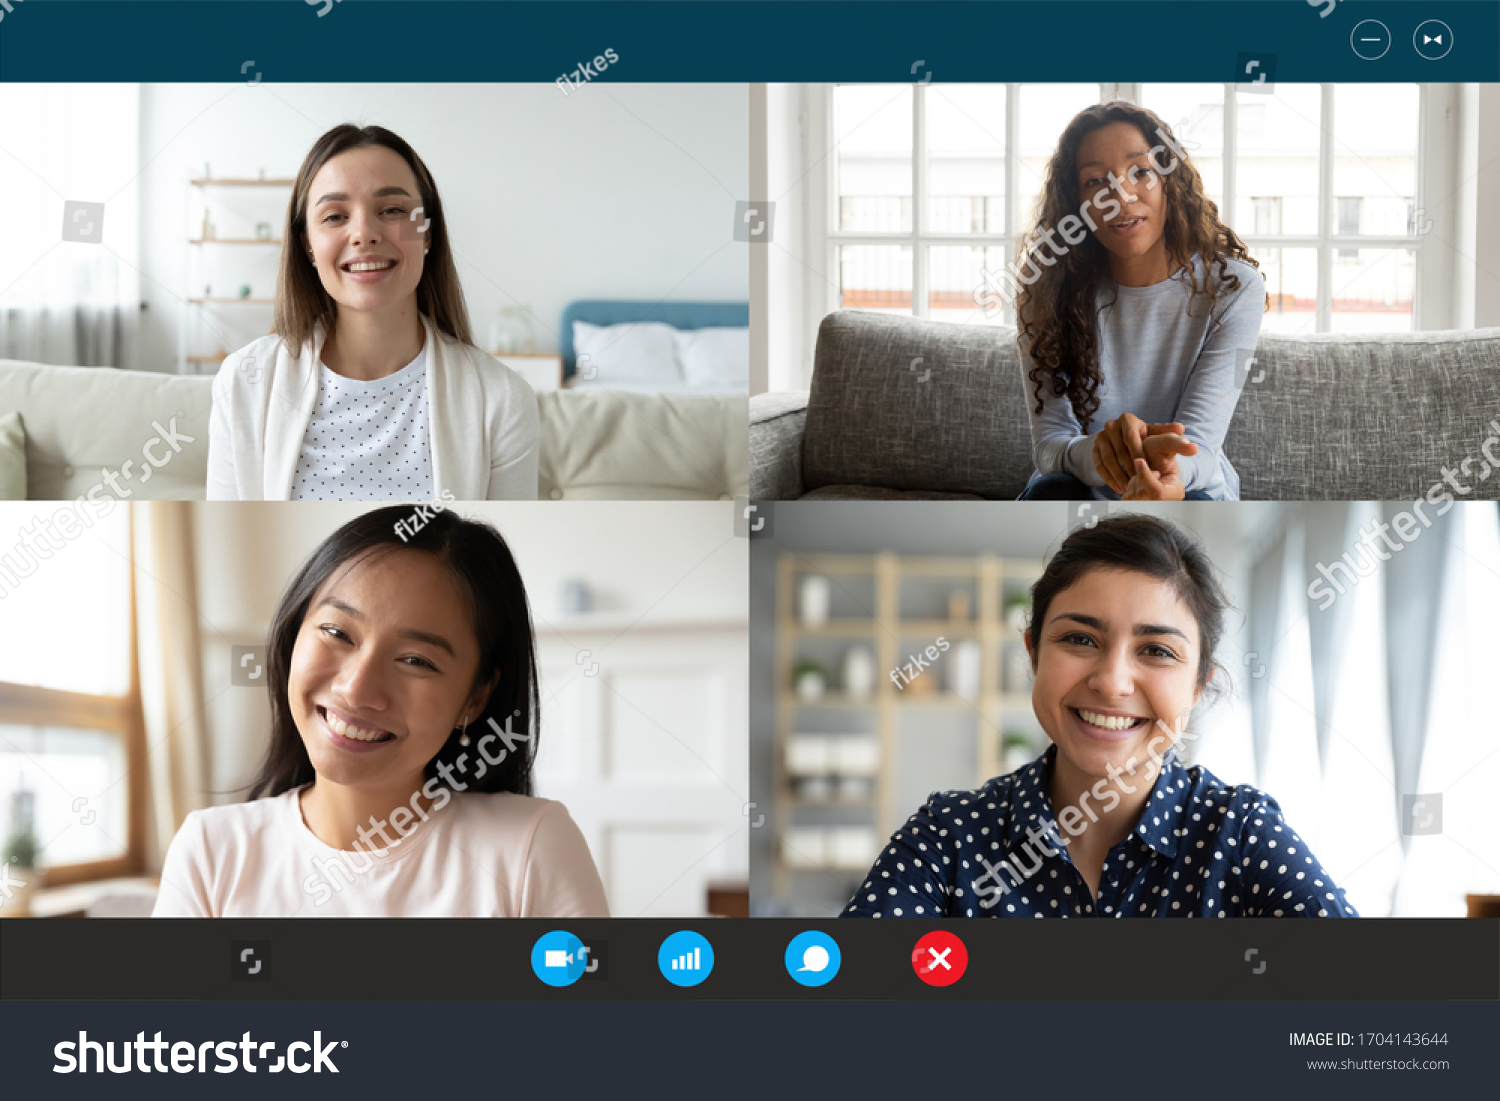 Laptop screen webcam view four multi ethnic beautiful millennial women involved in group video call. Meeting of friends on-line, colleagues working distantly, virtual communication modern tech concept #1704143644